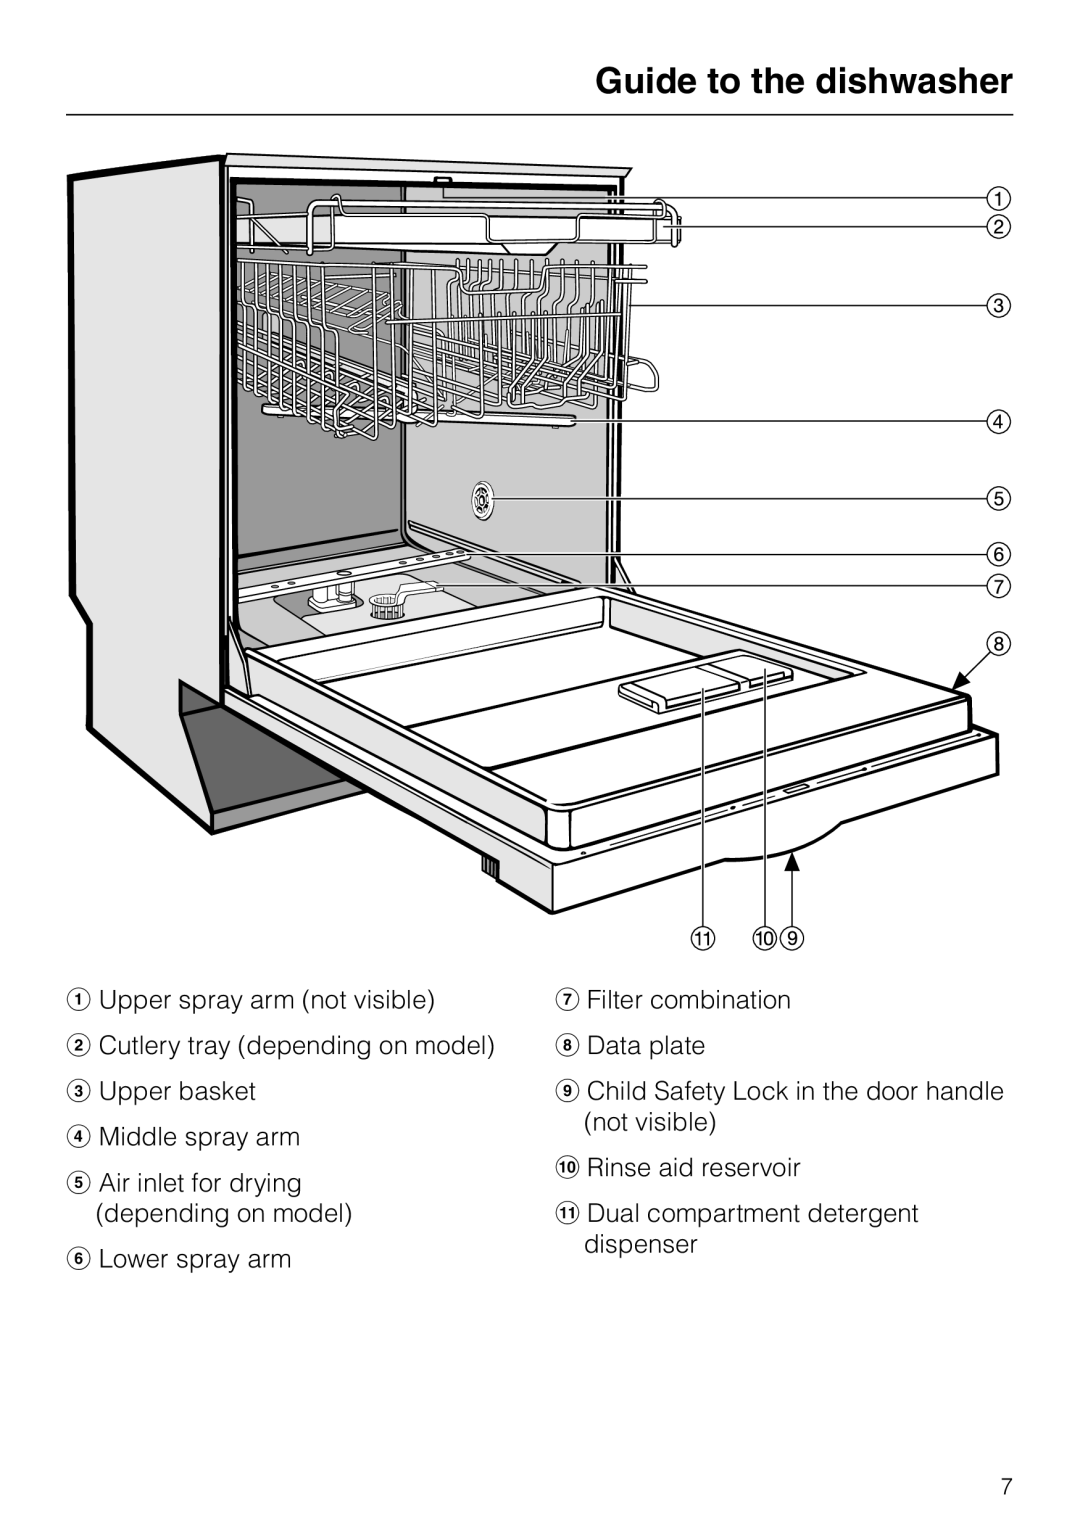 Miele G 2020 manual Guide to the dishwasher, aUpper spray arm not visible, bCutlery tray depending on model cUpper basket 